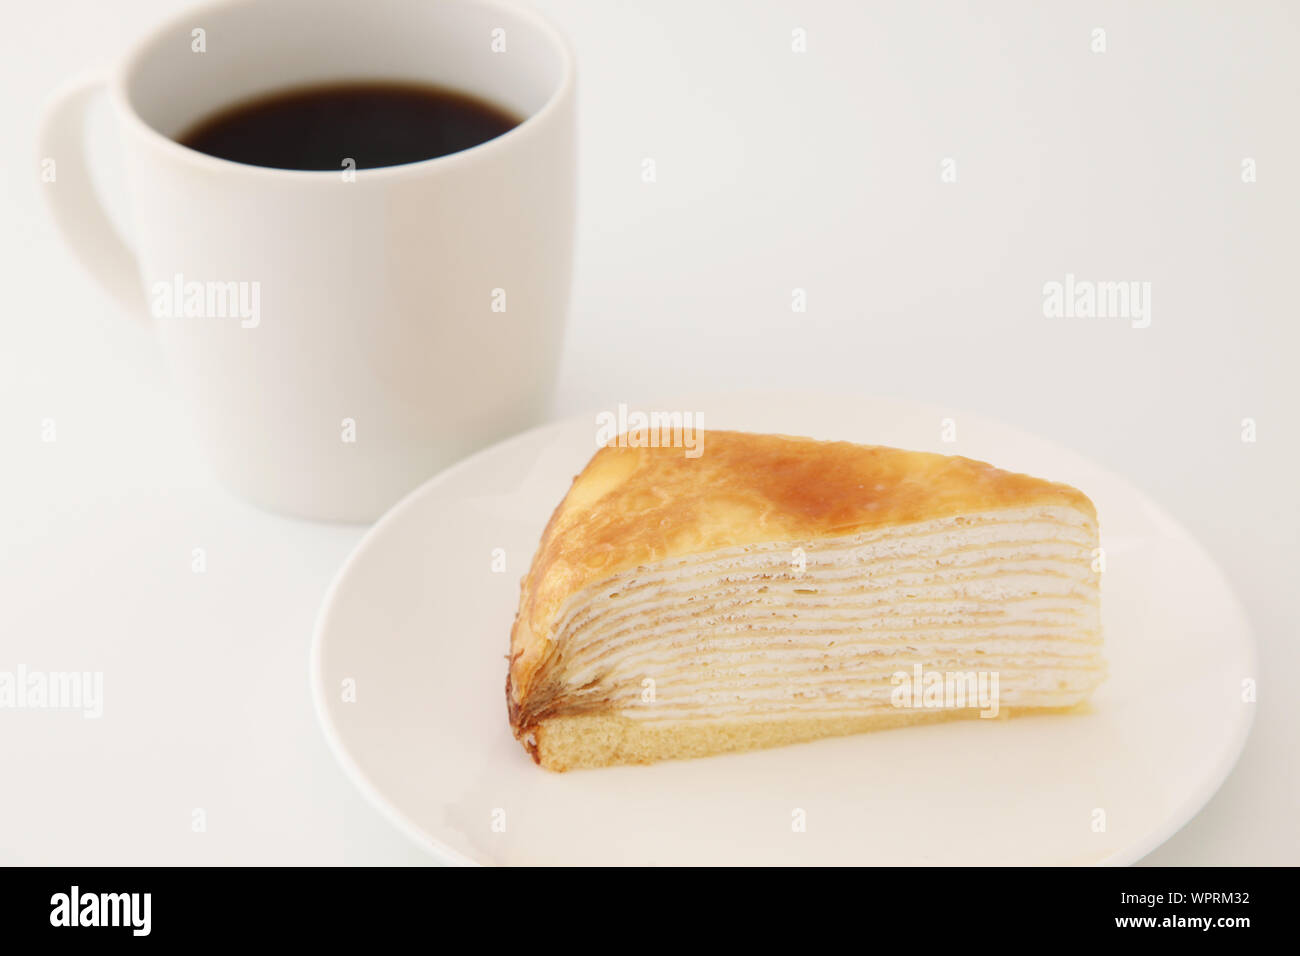 hot coffee with Mille crepe french cake on a plate isolated on white background Stock Photo